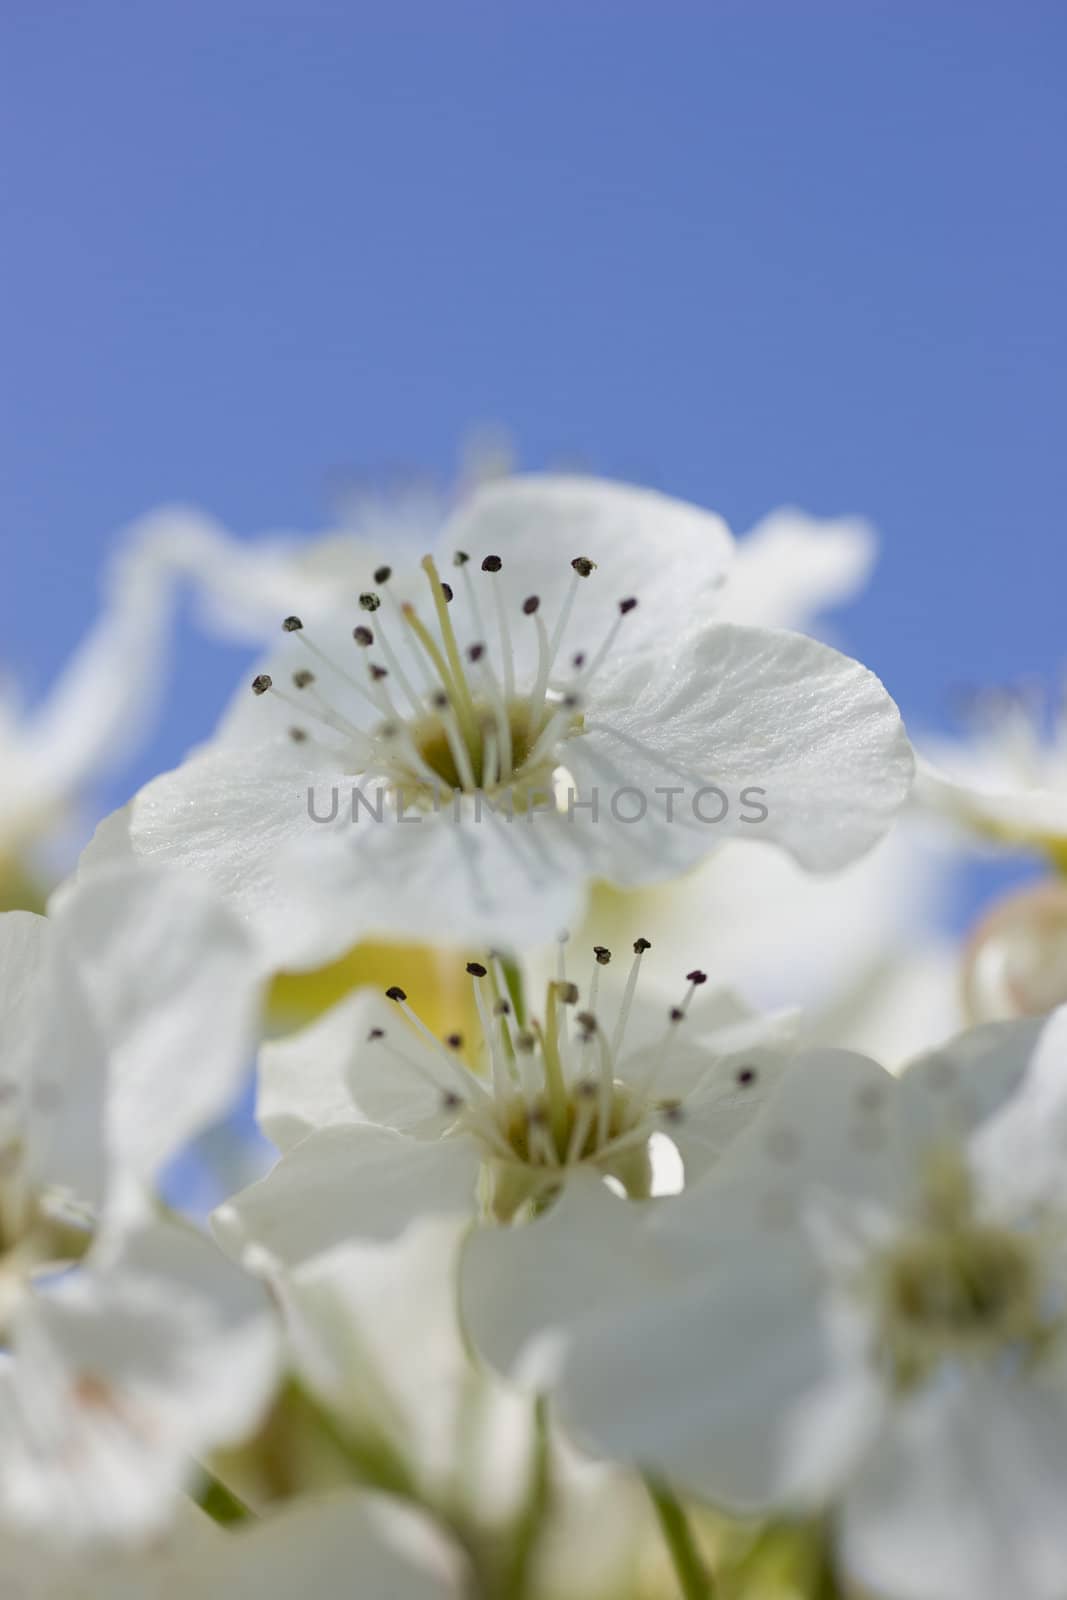 Bright white crab apple flowers, focus on the anthers, with blue sky in the background.